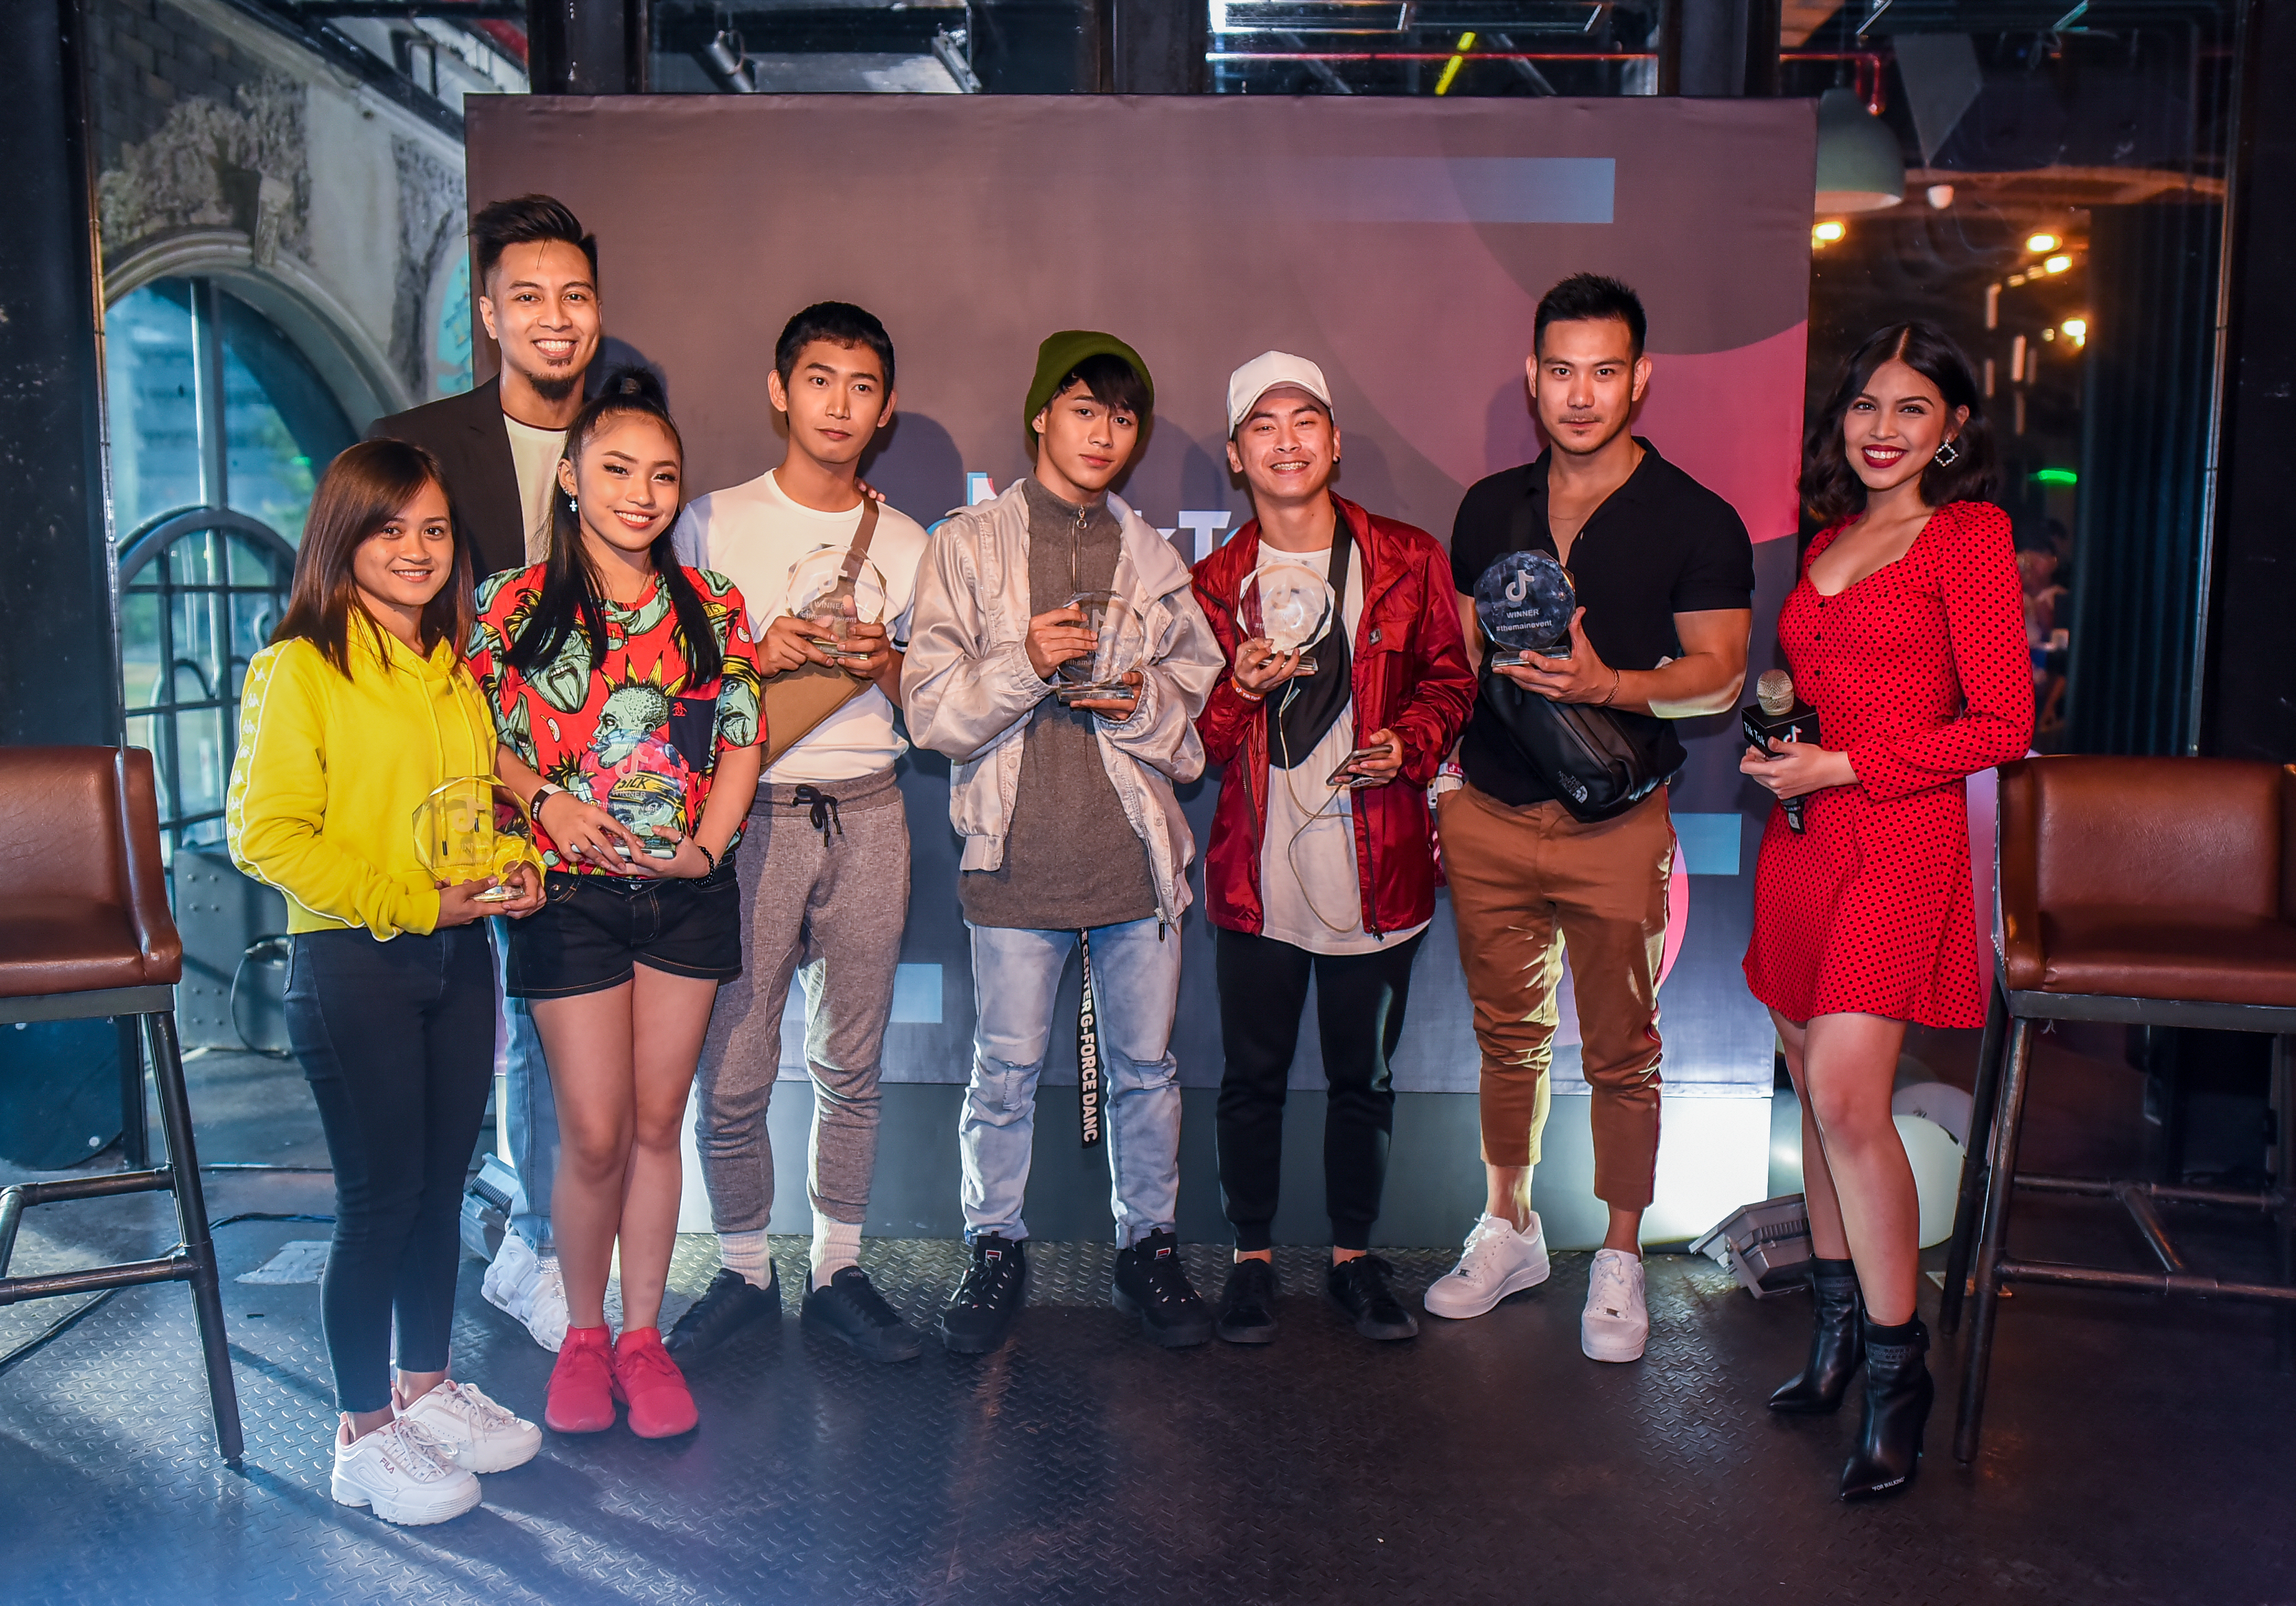 Maine poses with the winners of the TikTok themainevent challenge